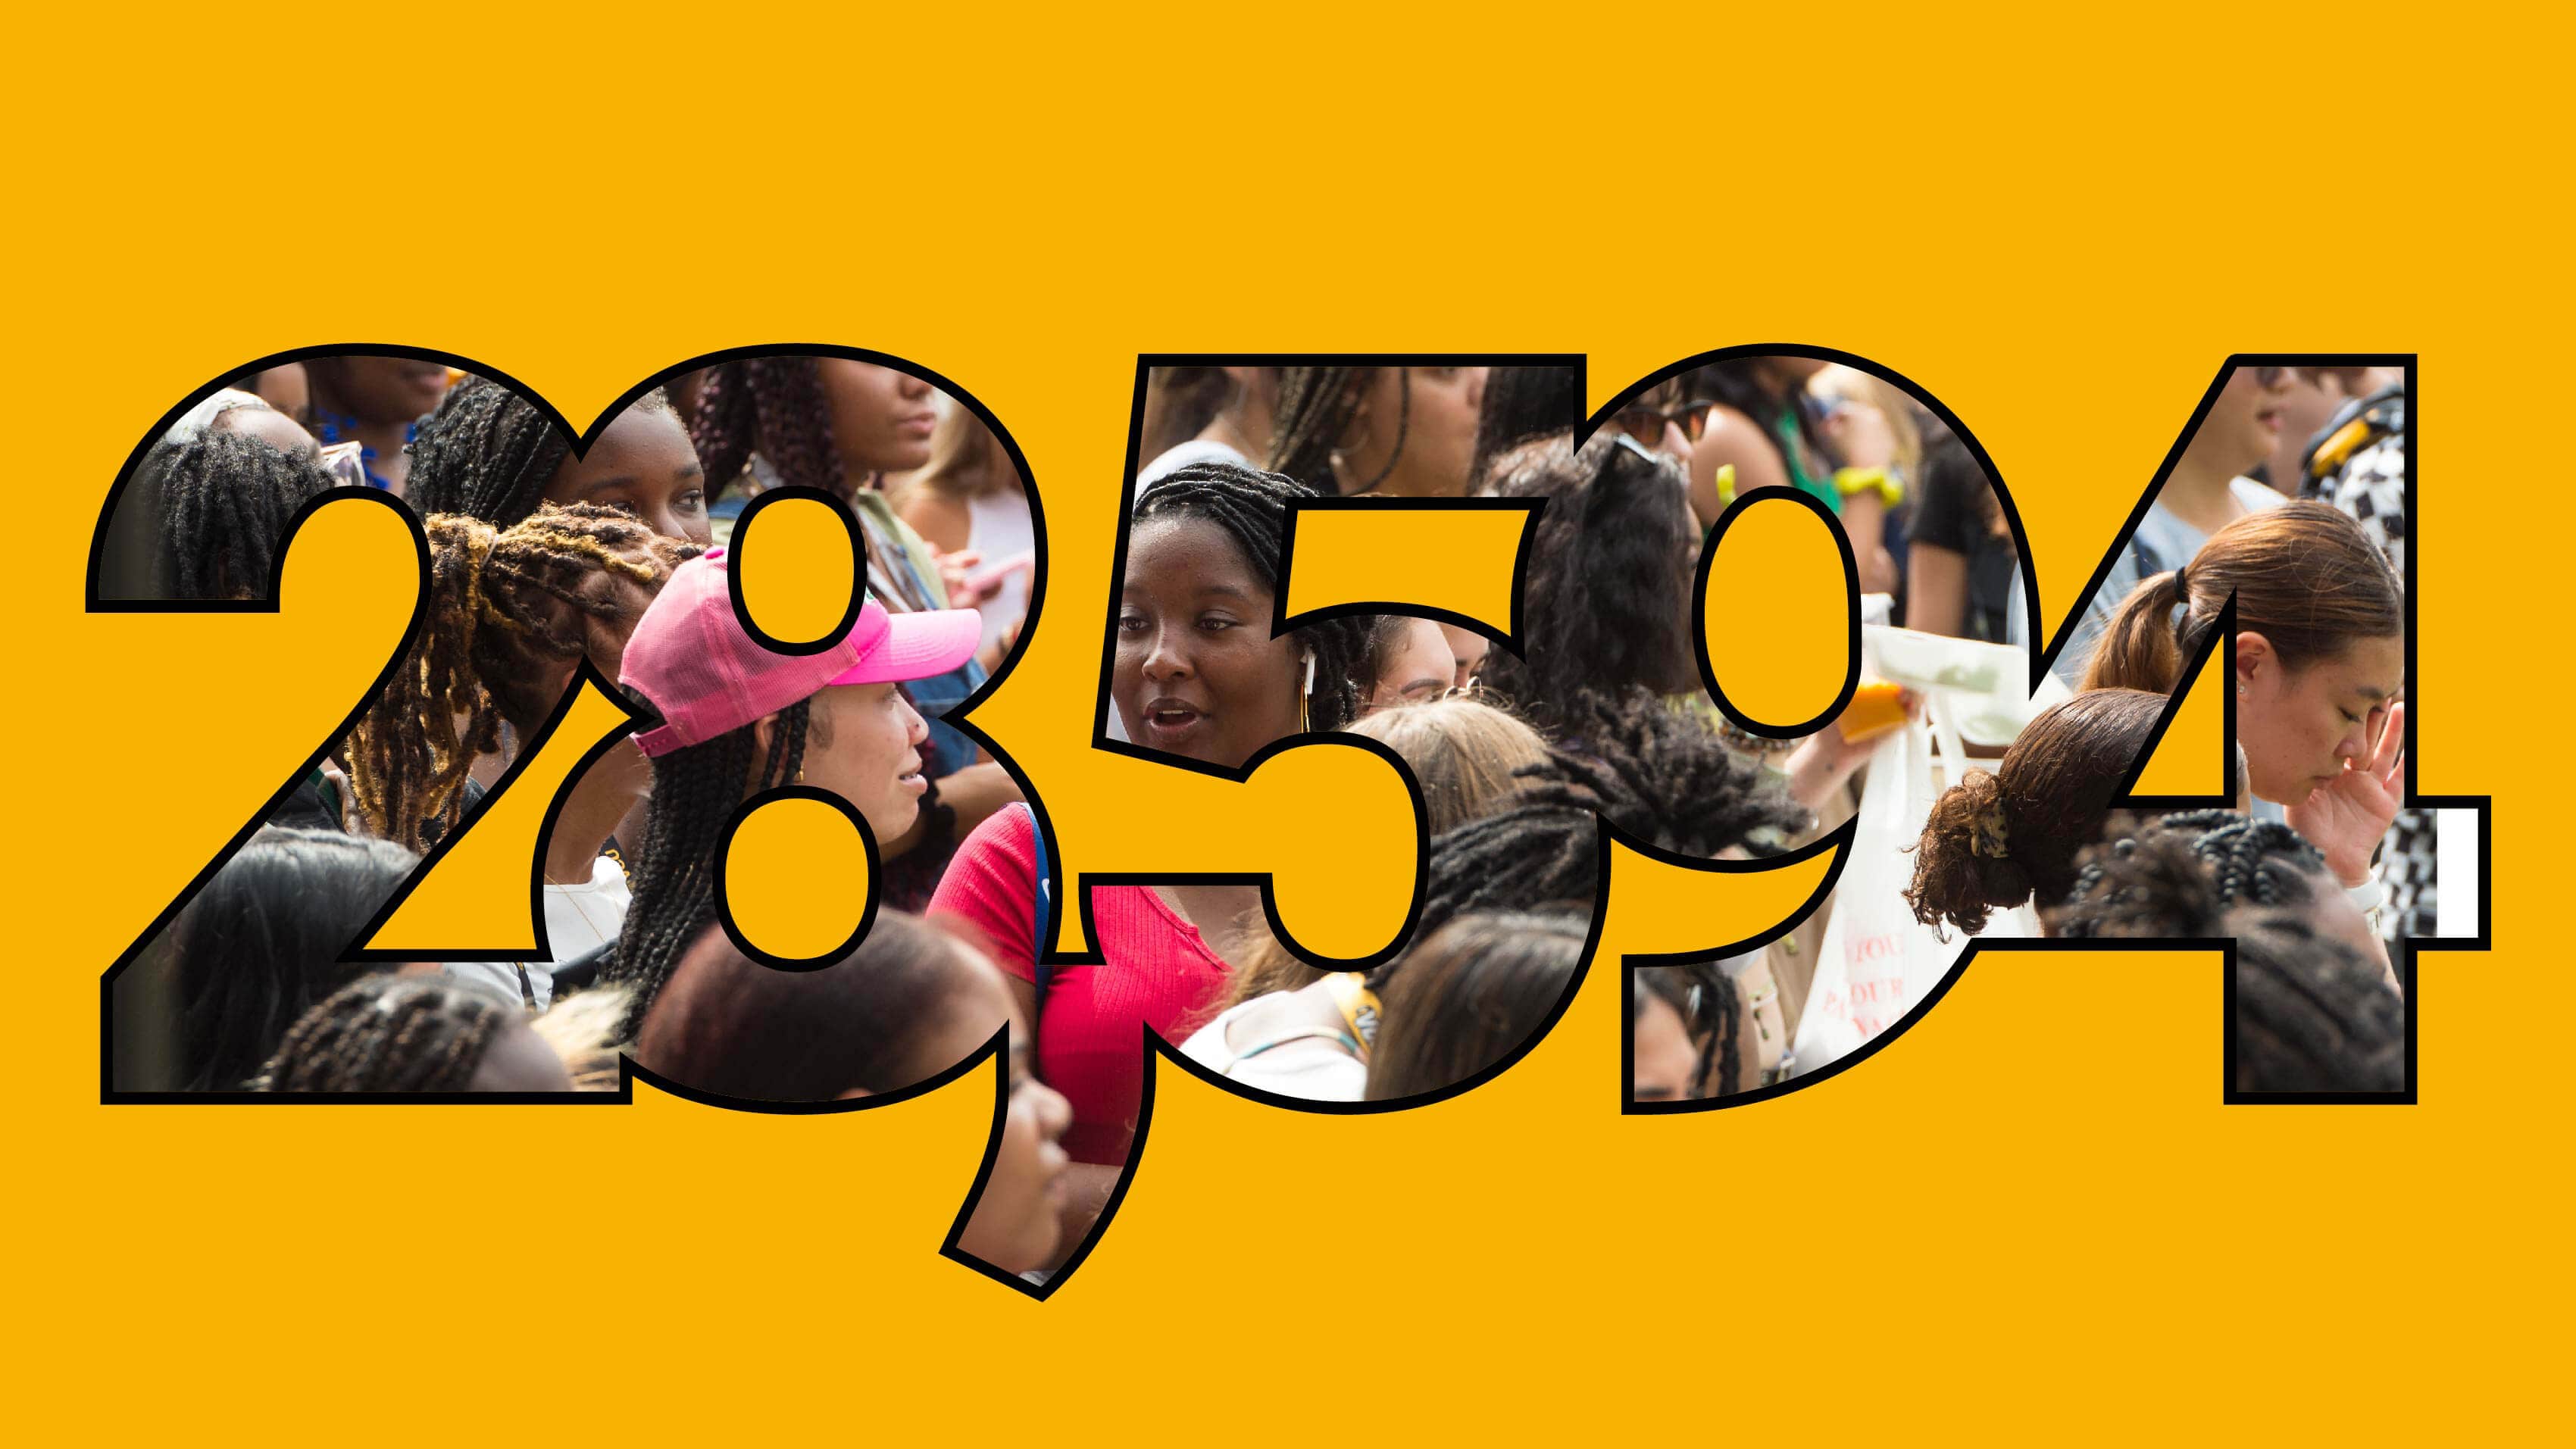 Large graphic image of the nuber 28,594, filled by a photo of smiling VCU students